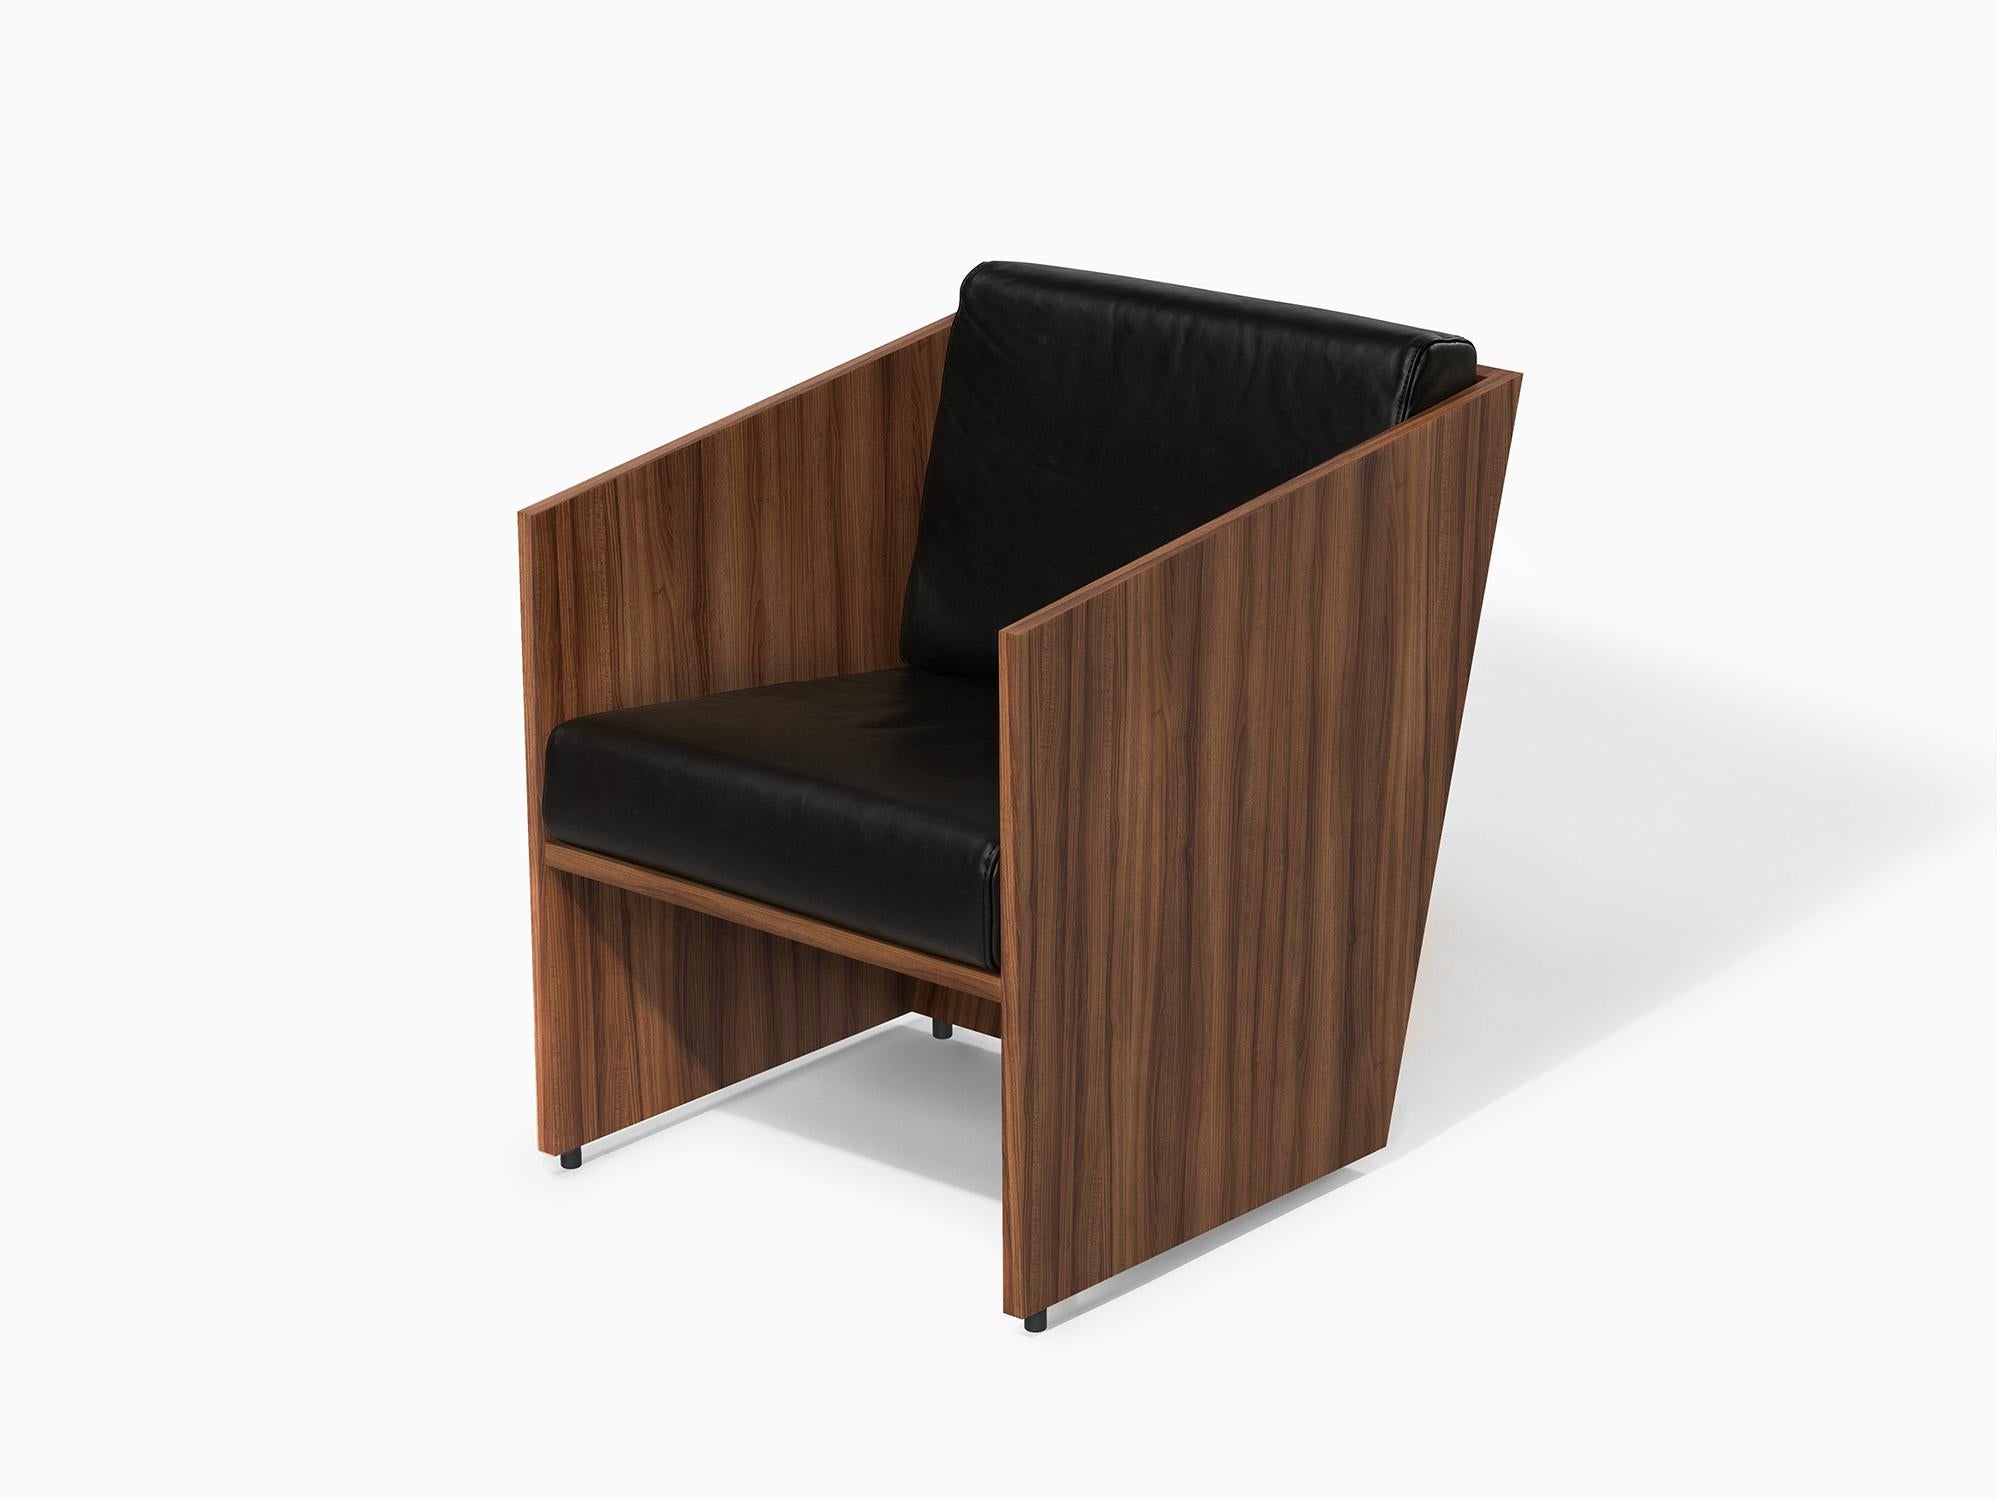 Portuguese Álvaro Siza Vieira - Armchair in Walnut Wood and Brown Leather - one of a kind For Sale